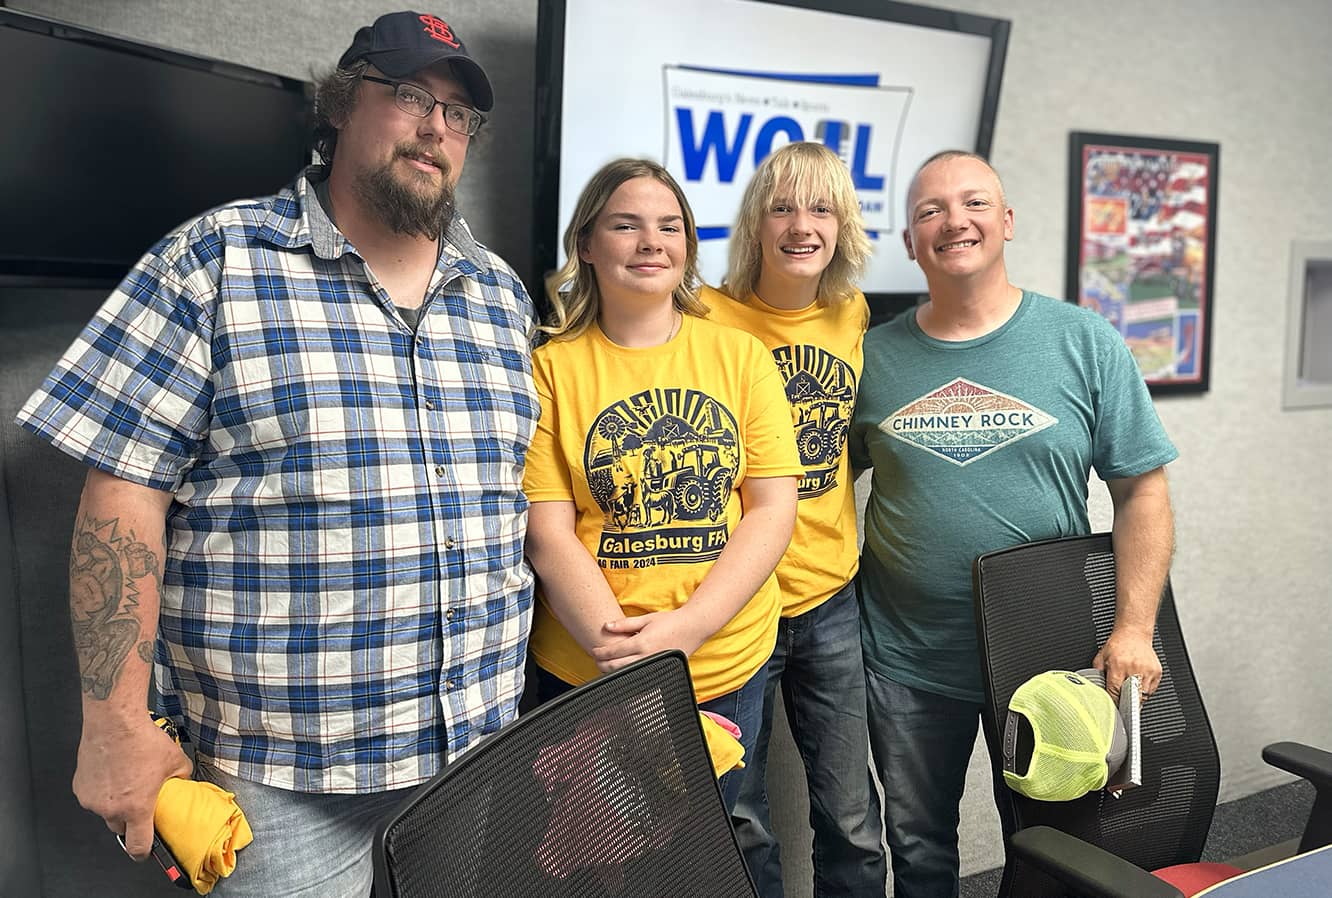 Members of the Galesburg FFA program, from left: alumni vice president Pat Sherman, students Hailey Smith and Logan Yeutson, and alumni president Ben Yeutson.